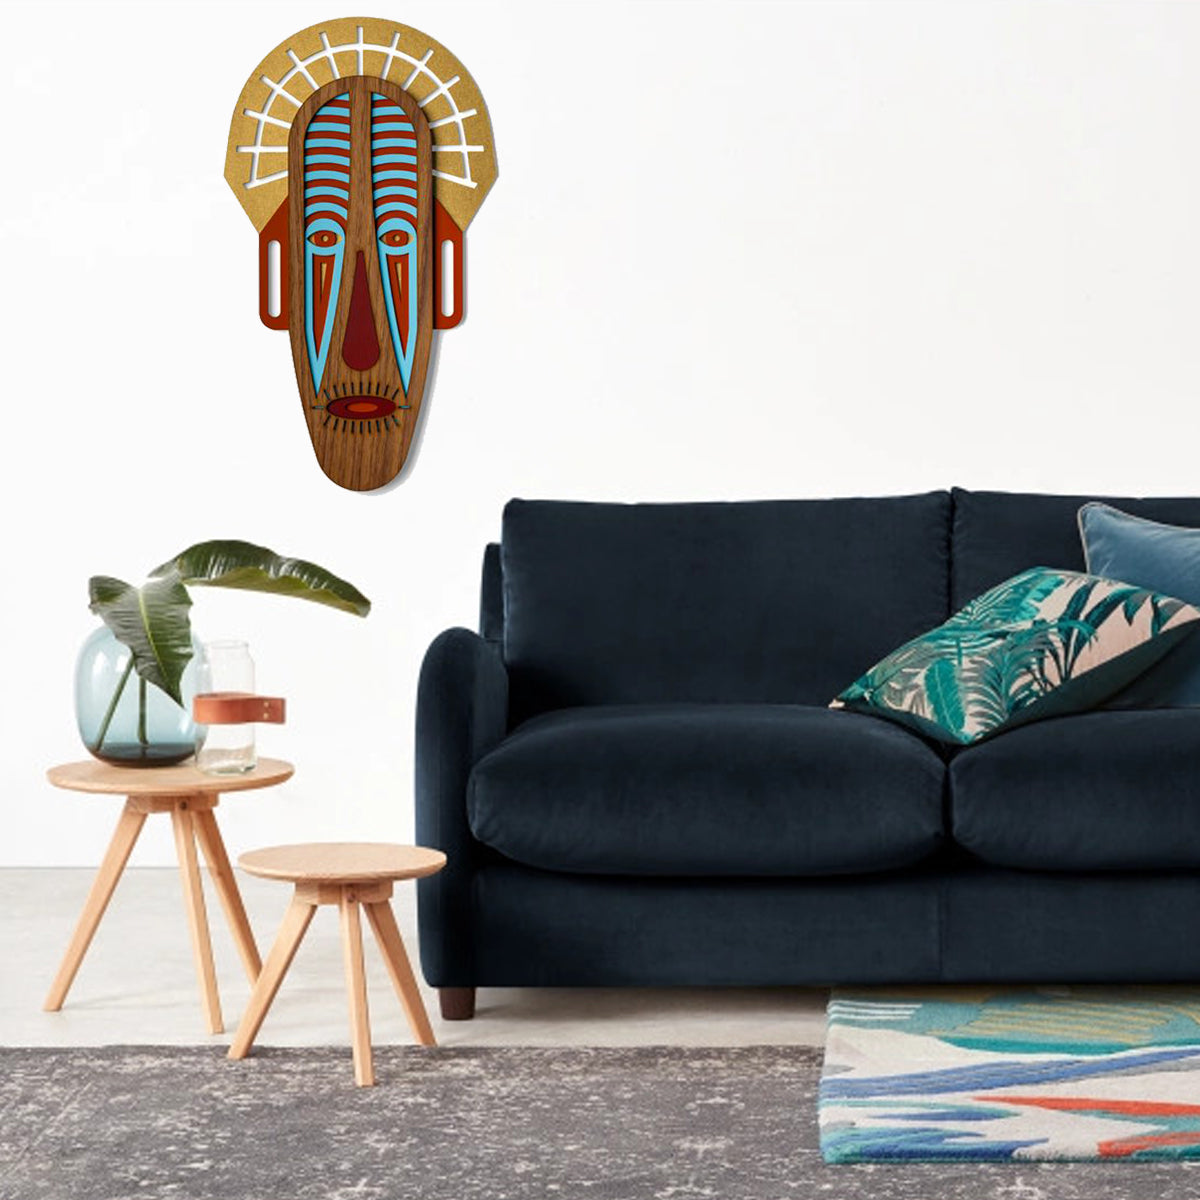 Colorful African Masks and Tribal Masks on the Wall Art by Wooden